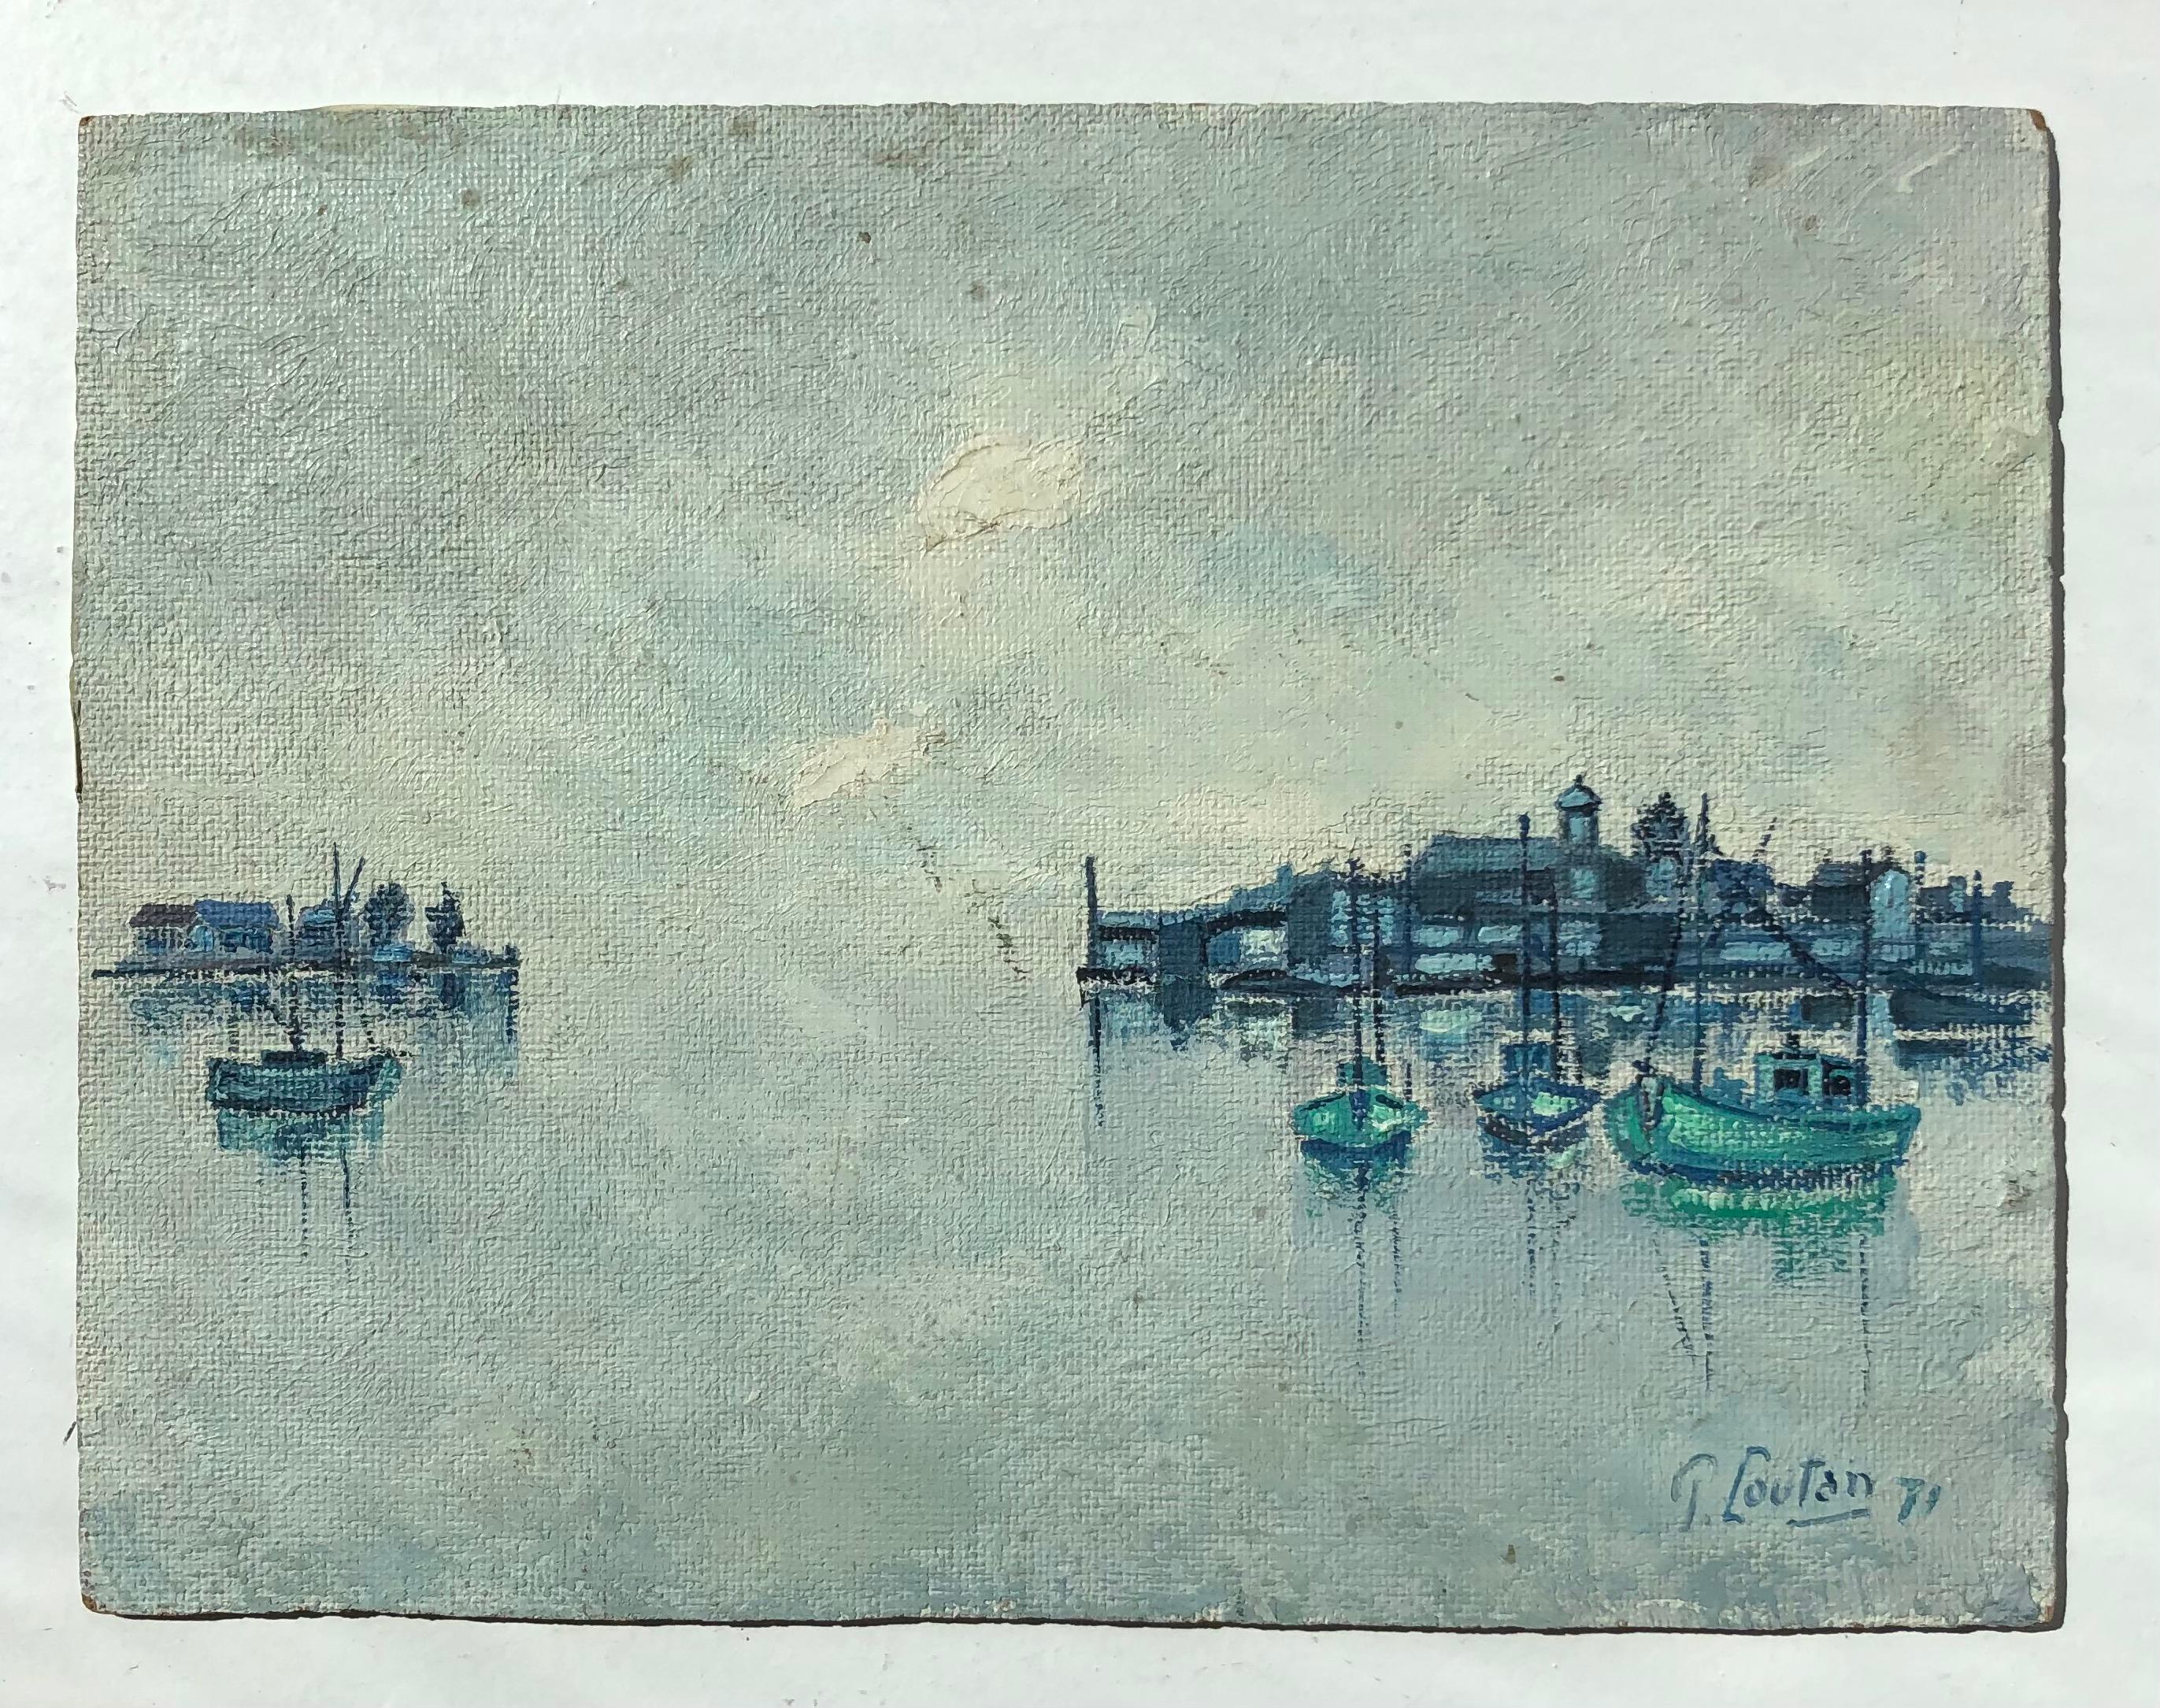 Fishing boats in the harbor - Painting by P. Loutan